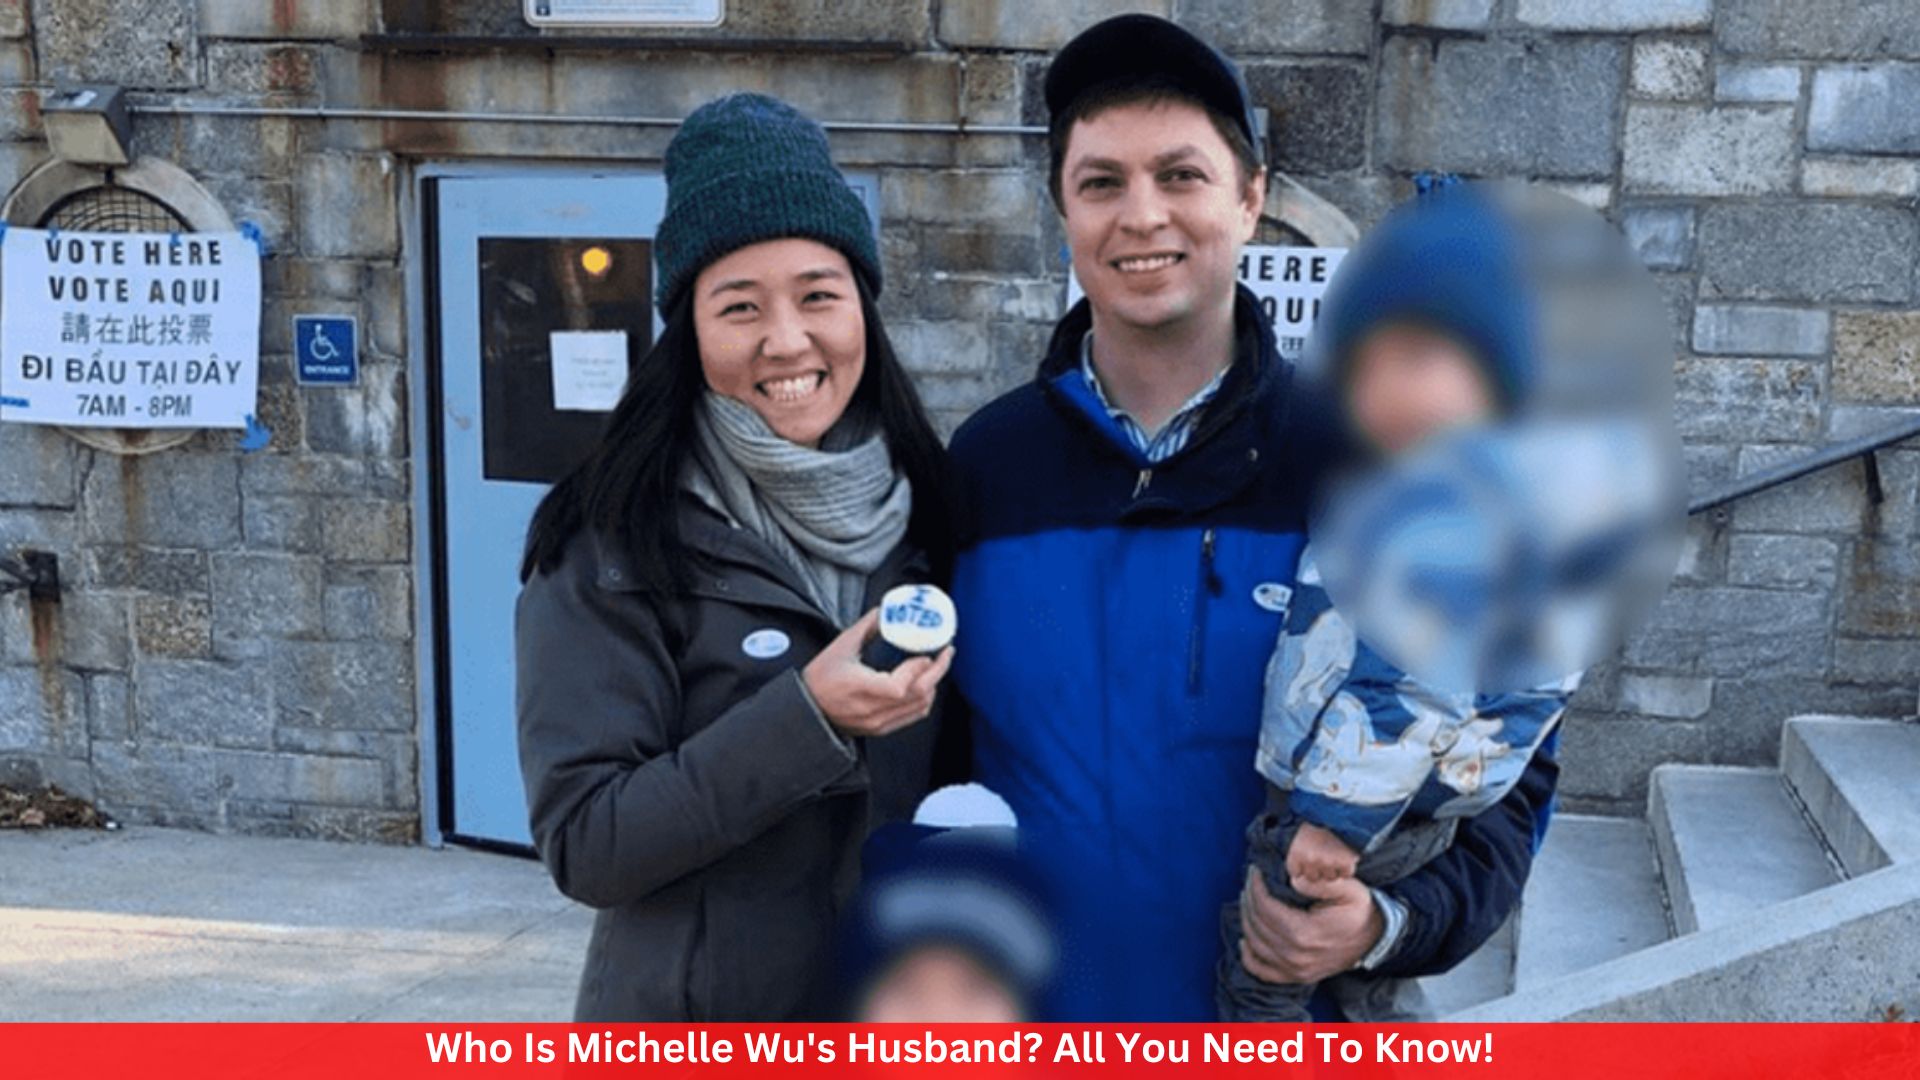 Who Is Michelle Wu's Husband? All You Need To Know!